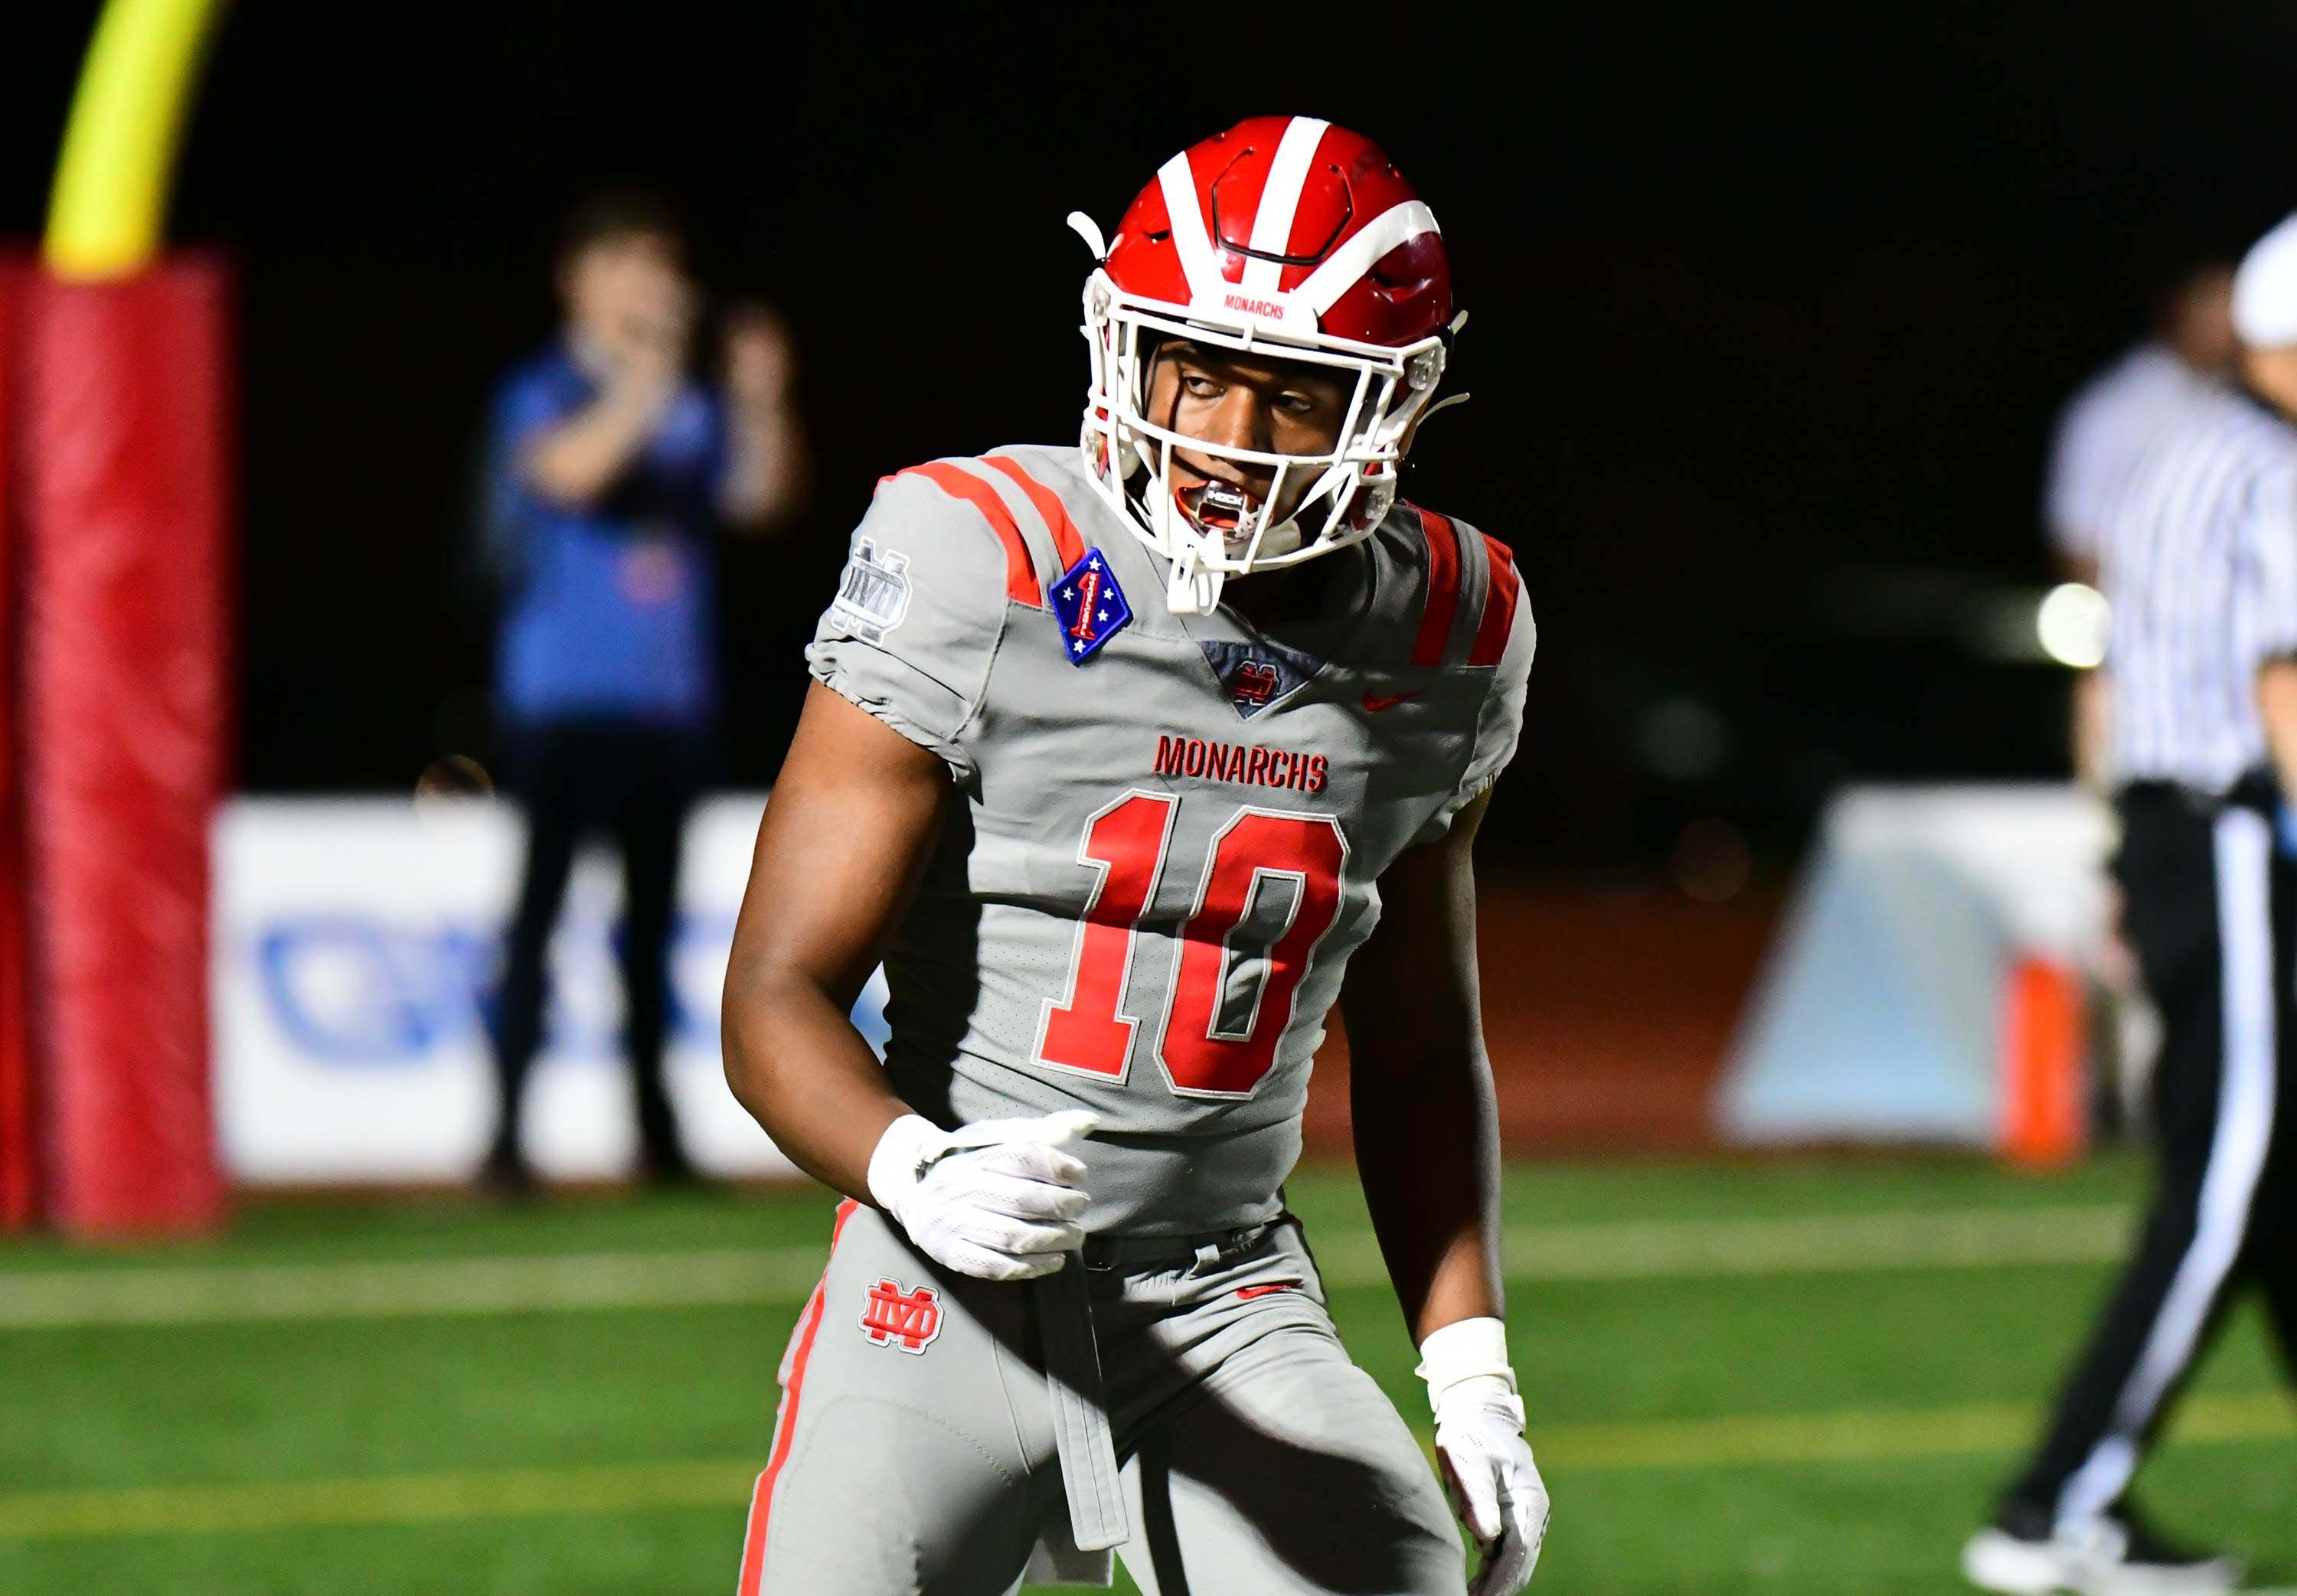 Kyron Ware-Hudson will be among the many weapons available Friday for Mater Dei freshman quarterback Elijah Brown, getting the start for the Monarchs.